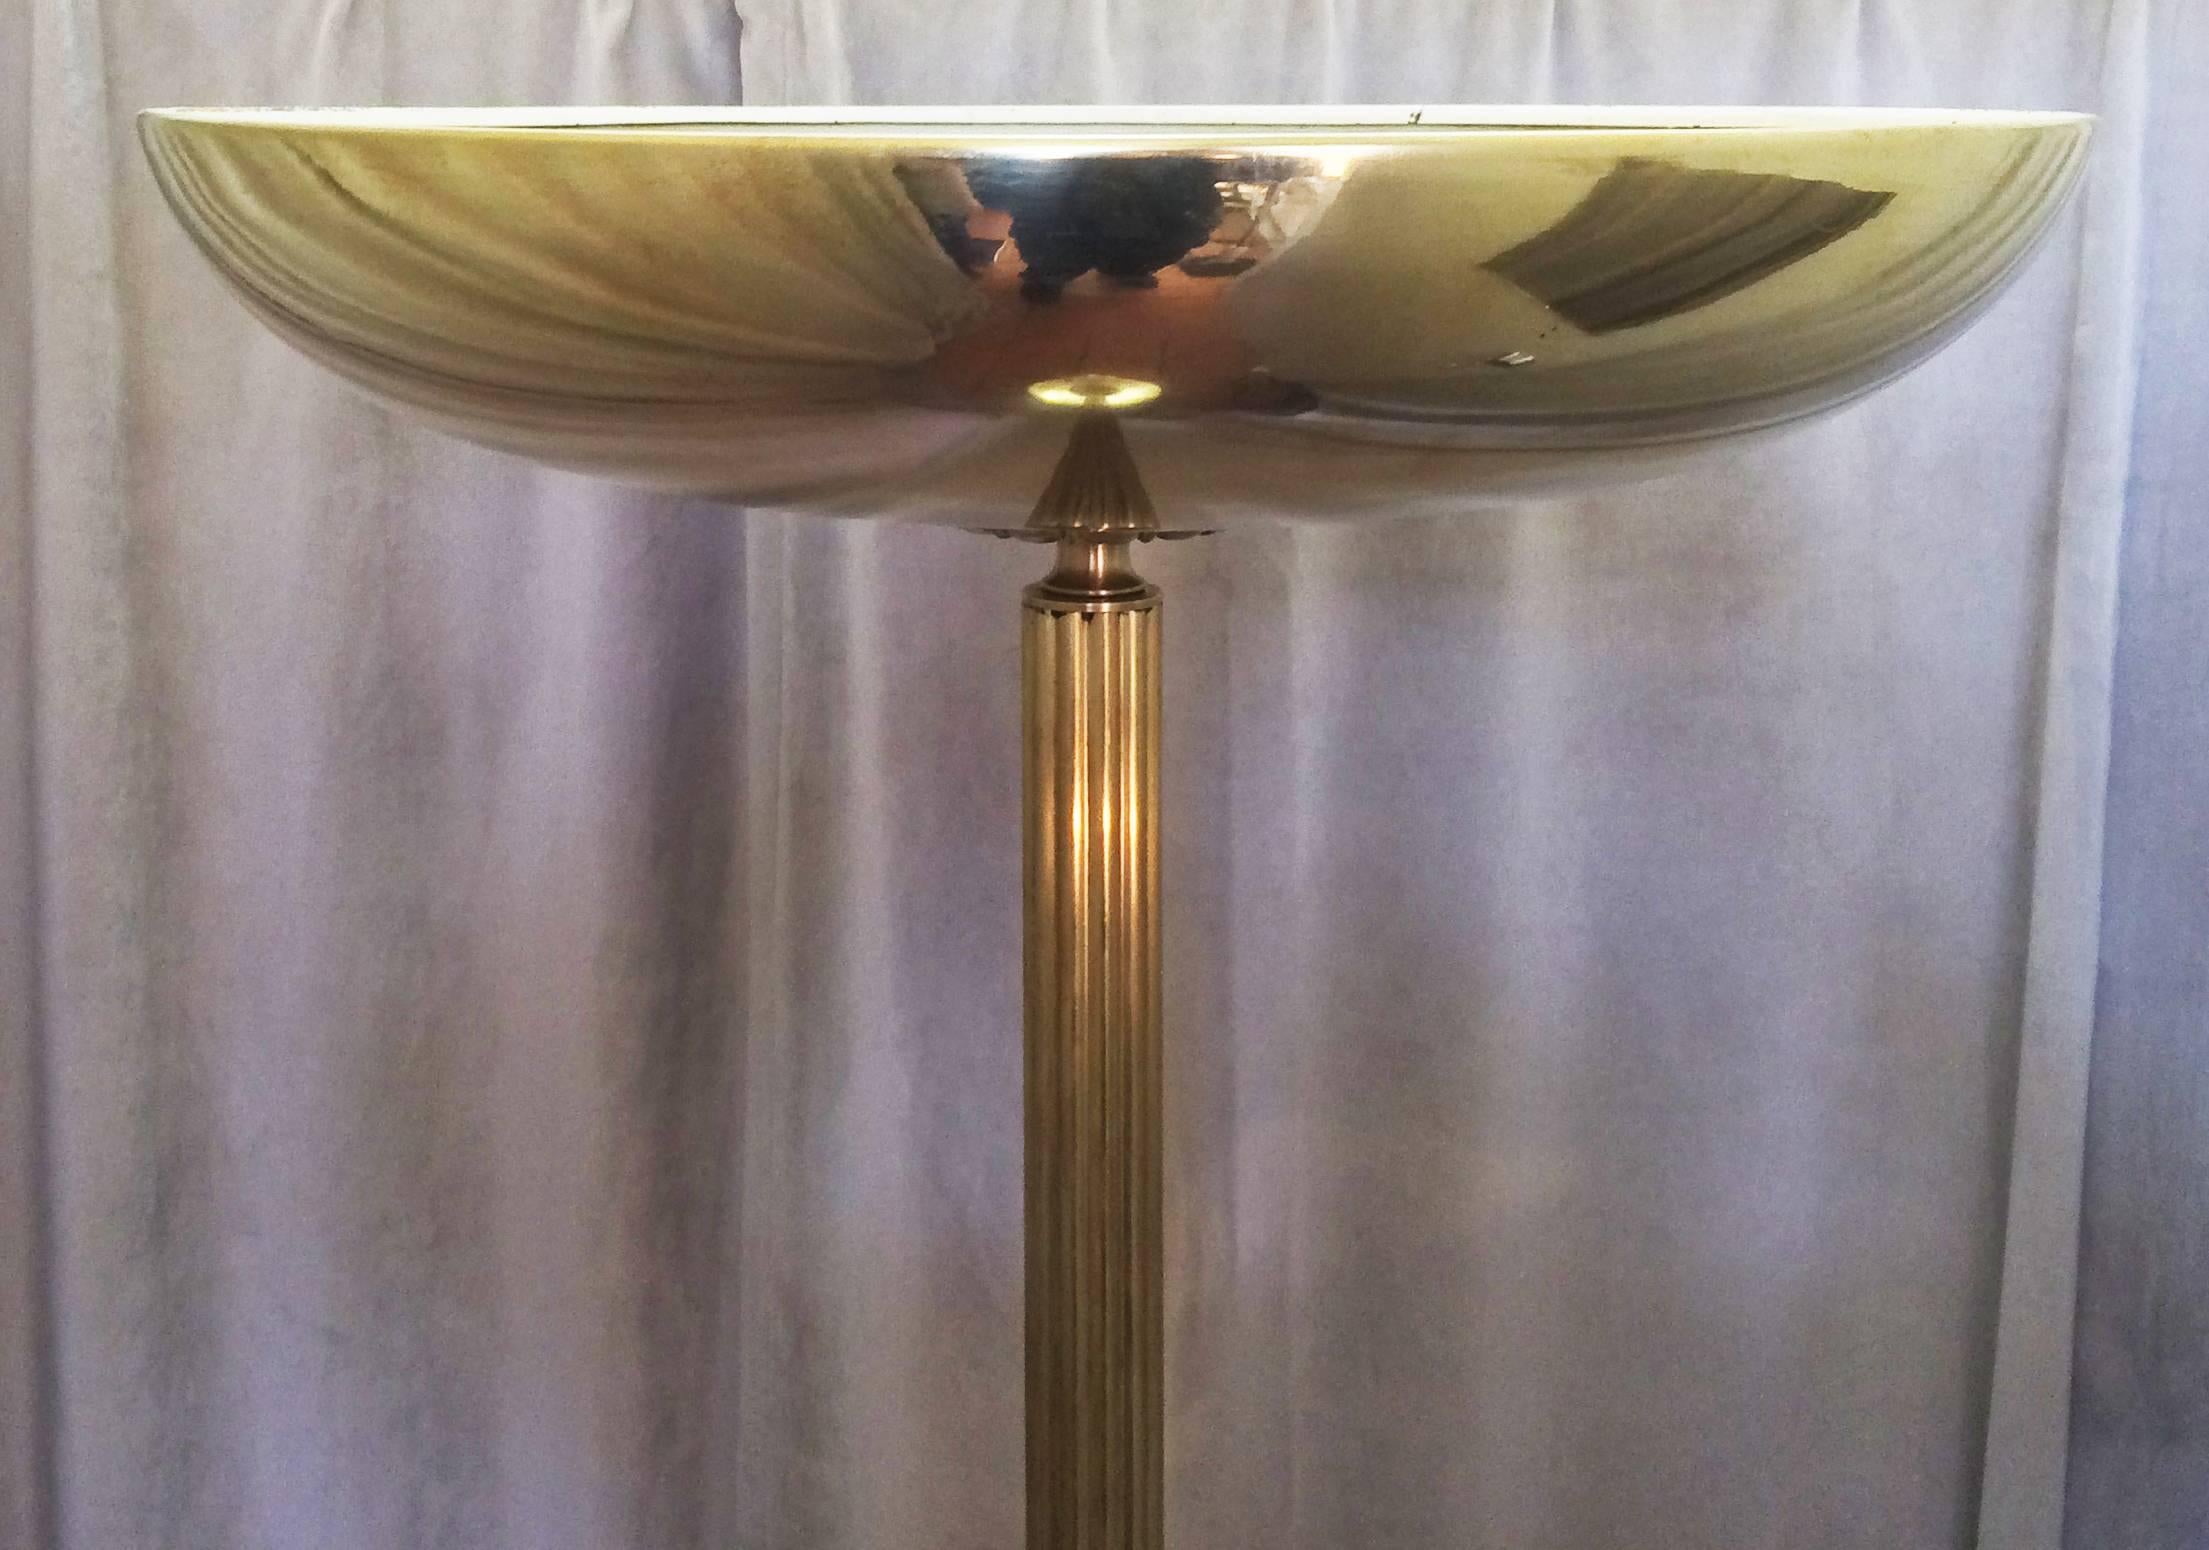 Art Deco bronze torchiere / uplighter standard lamp, with reeded vertical column and solid cast decorative bronze supports at top and bottom; the top is an upward semi dome, and the base is rounded edge large disc for stability. The lamp is in